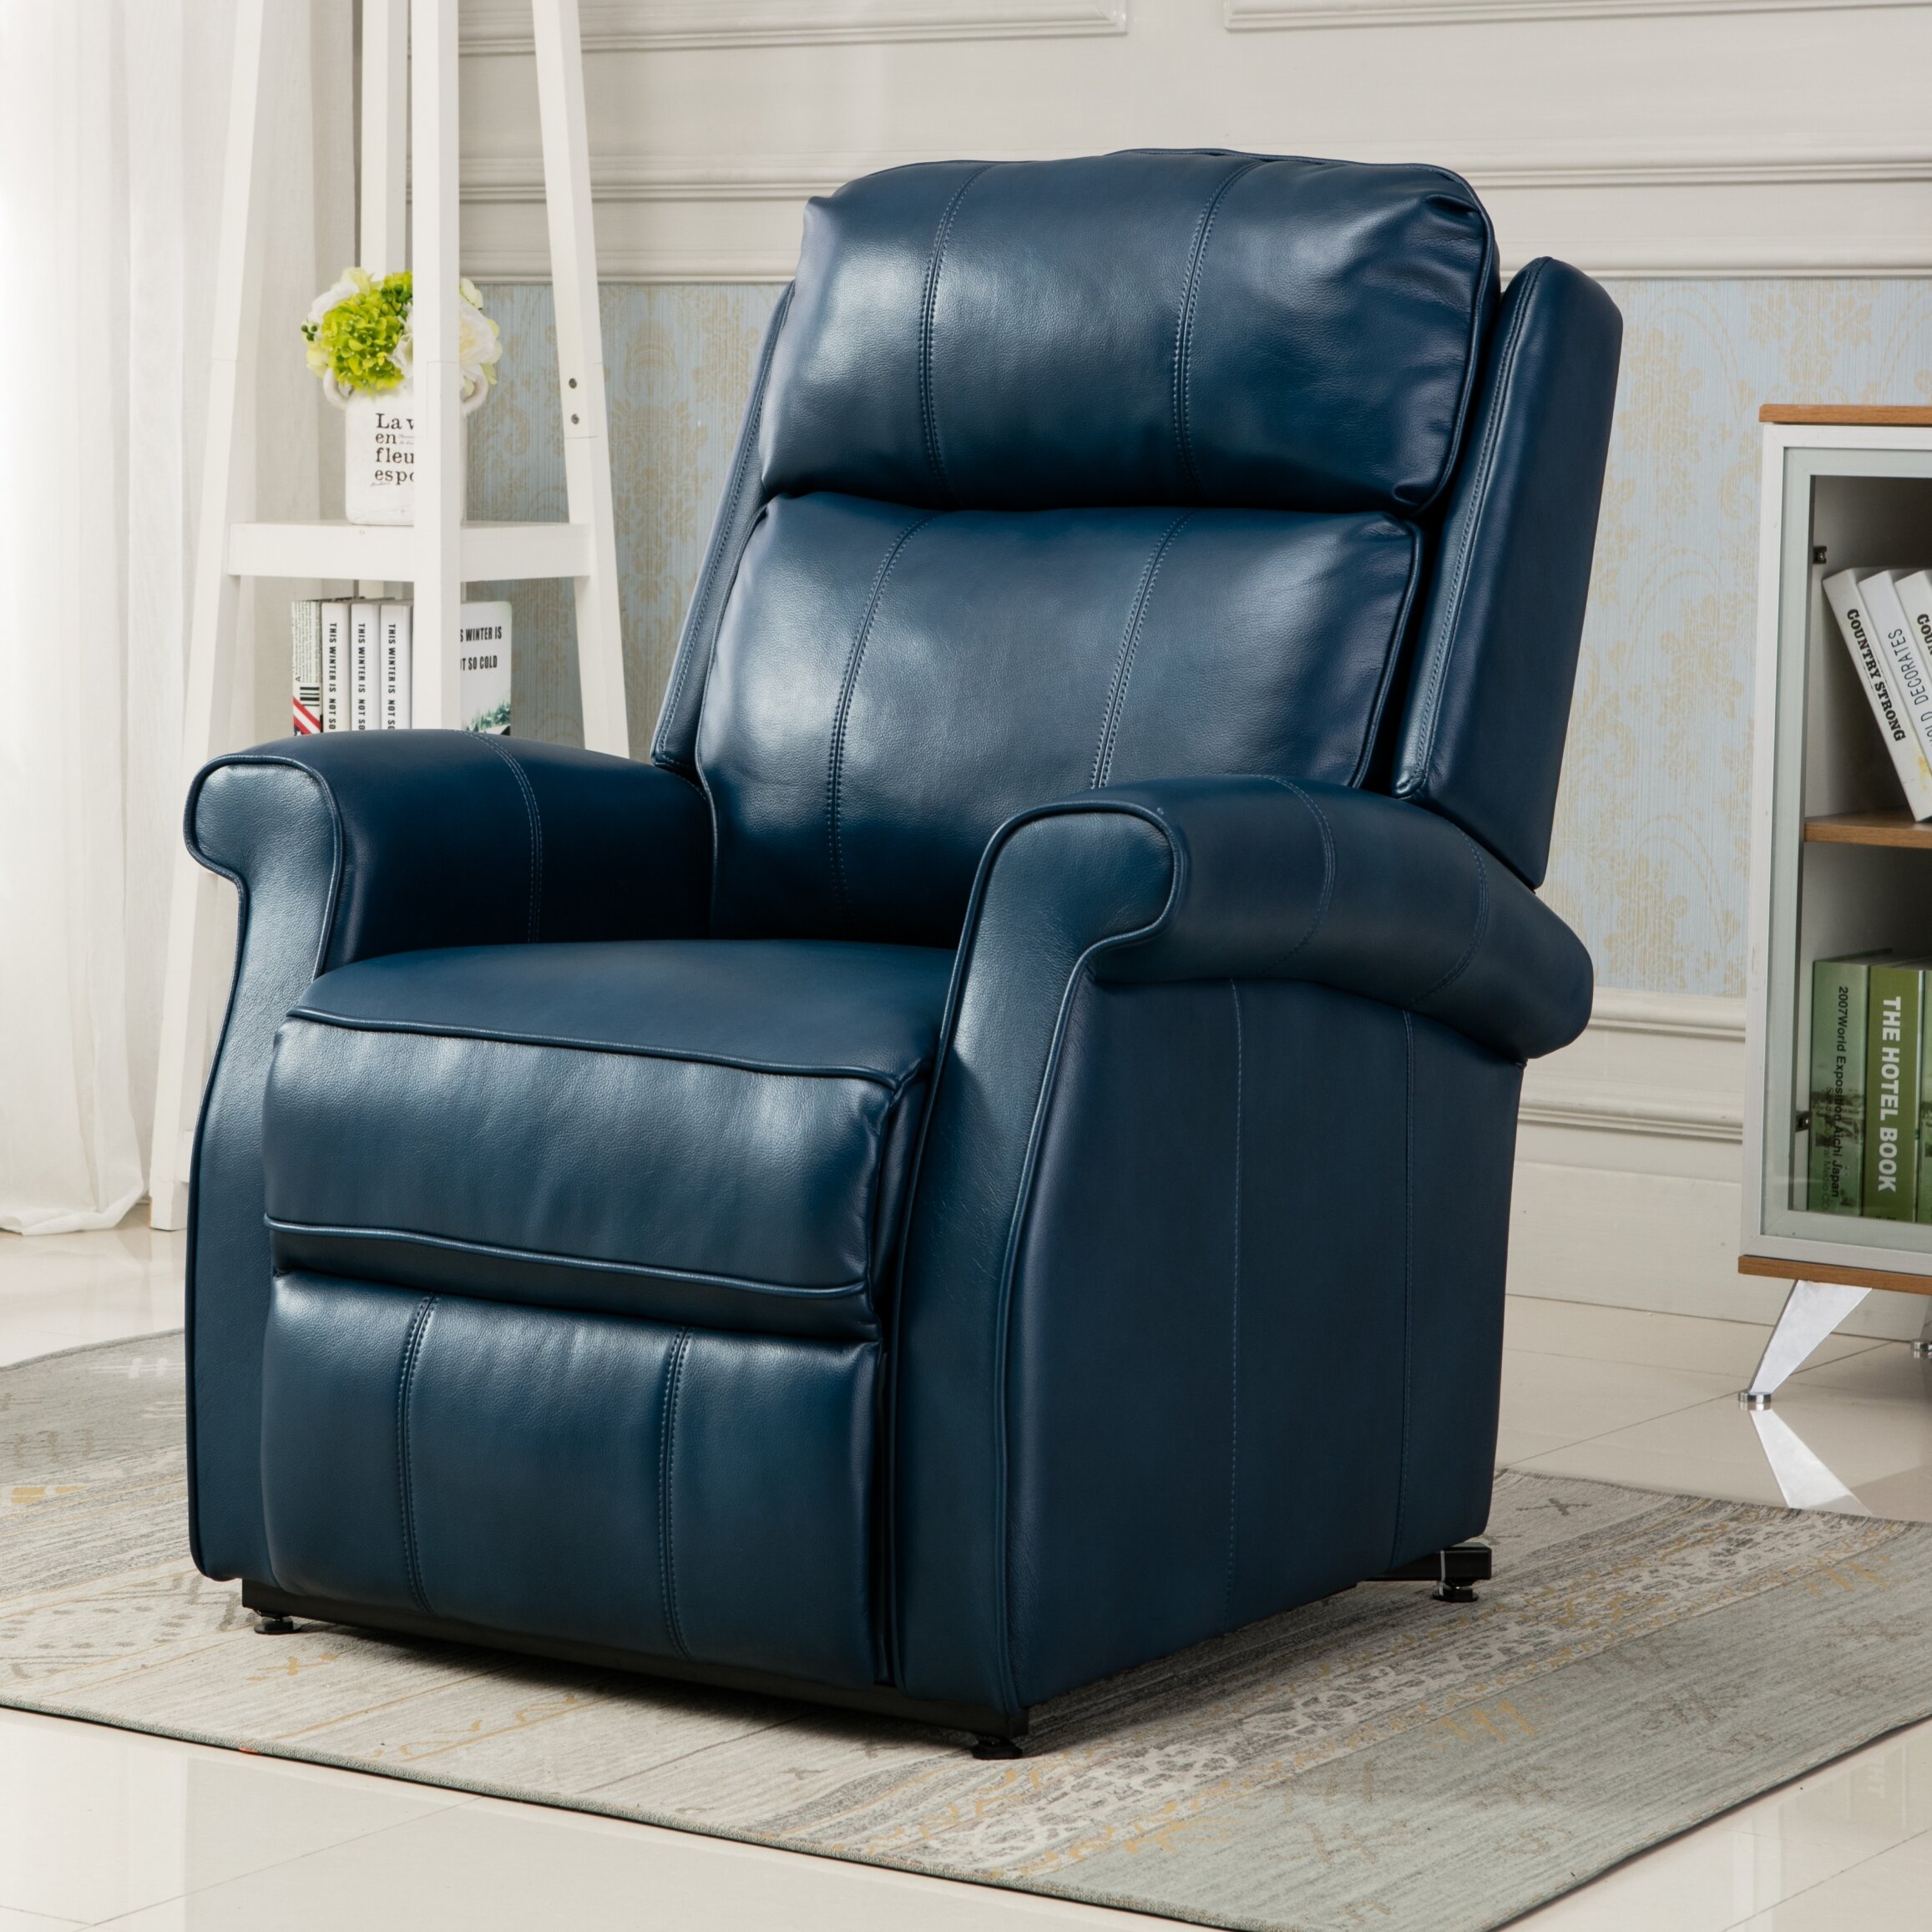 Nojus 34.5” Wide Faux Leather Power Lift Assist Recliner